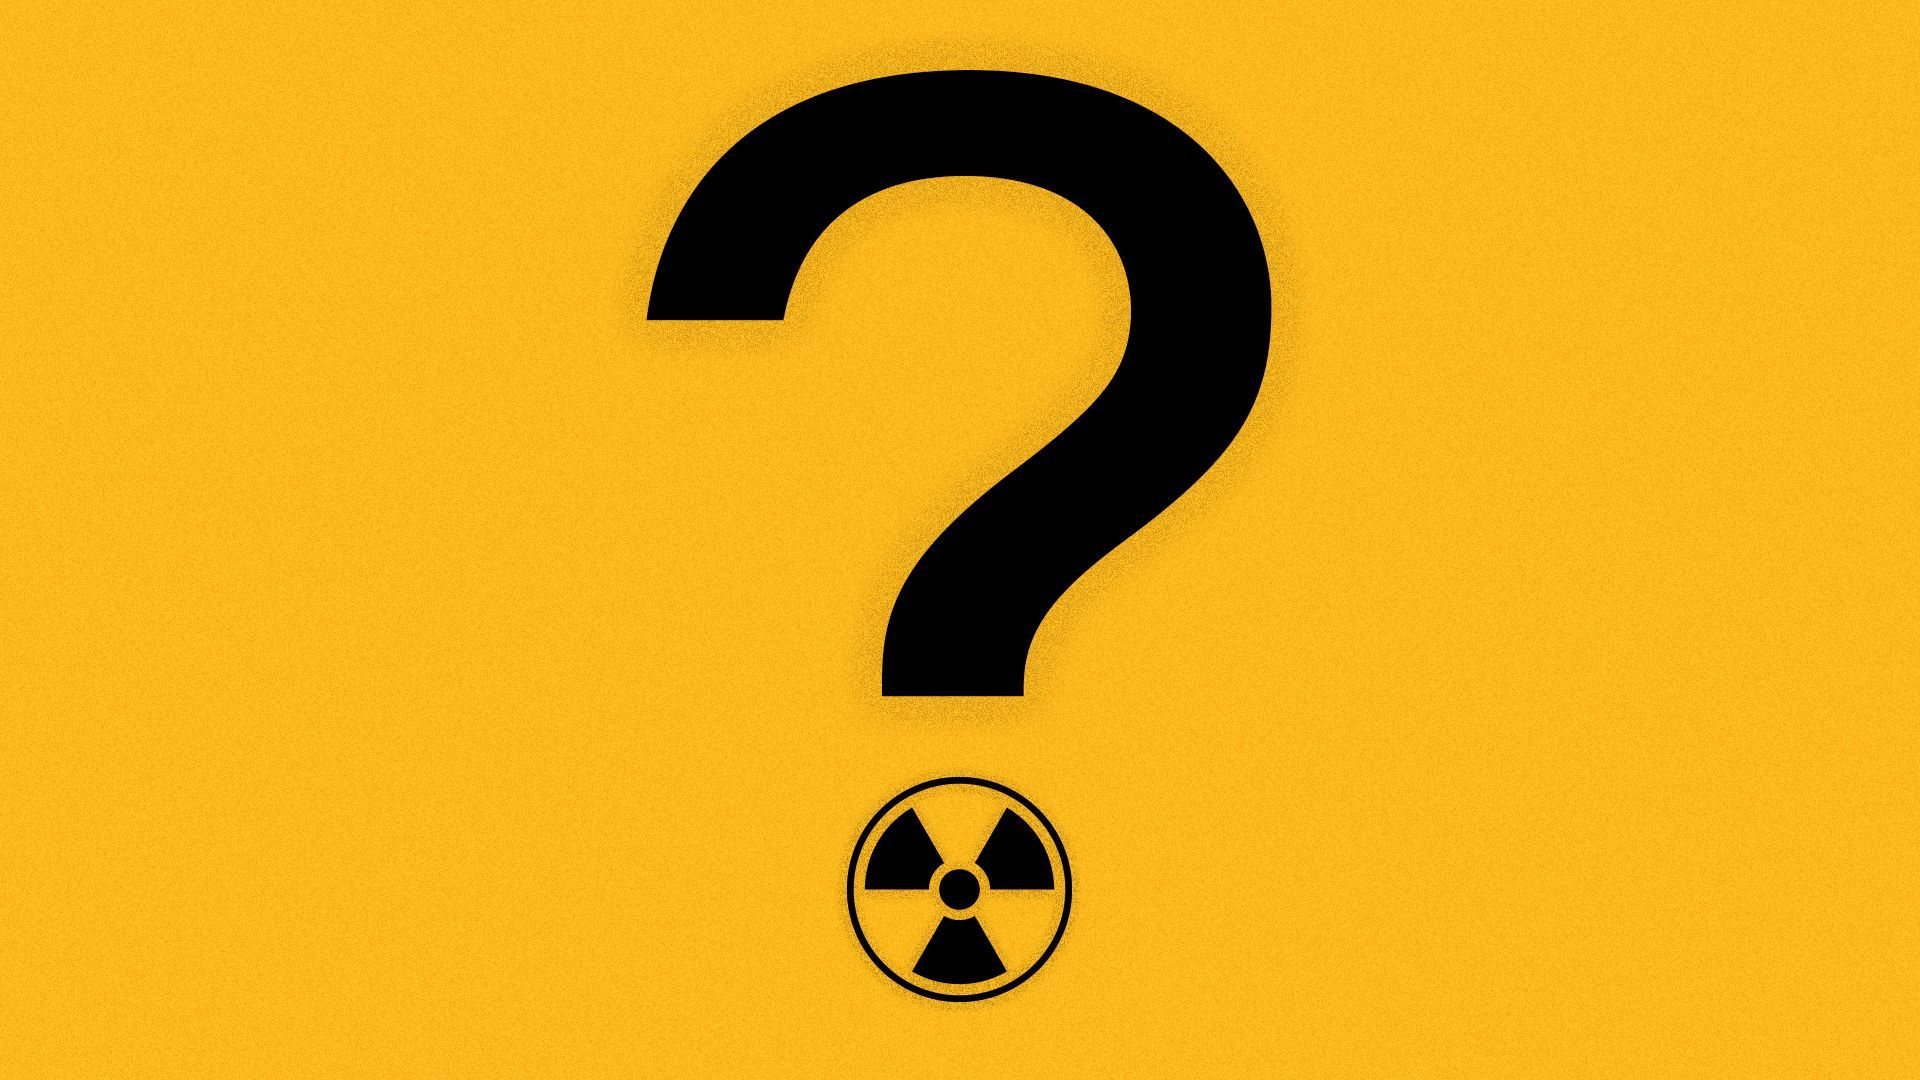 Illustration of a question mark with a nuclear symbol as the dot on the bottom. 